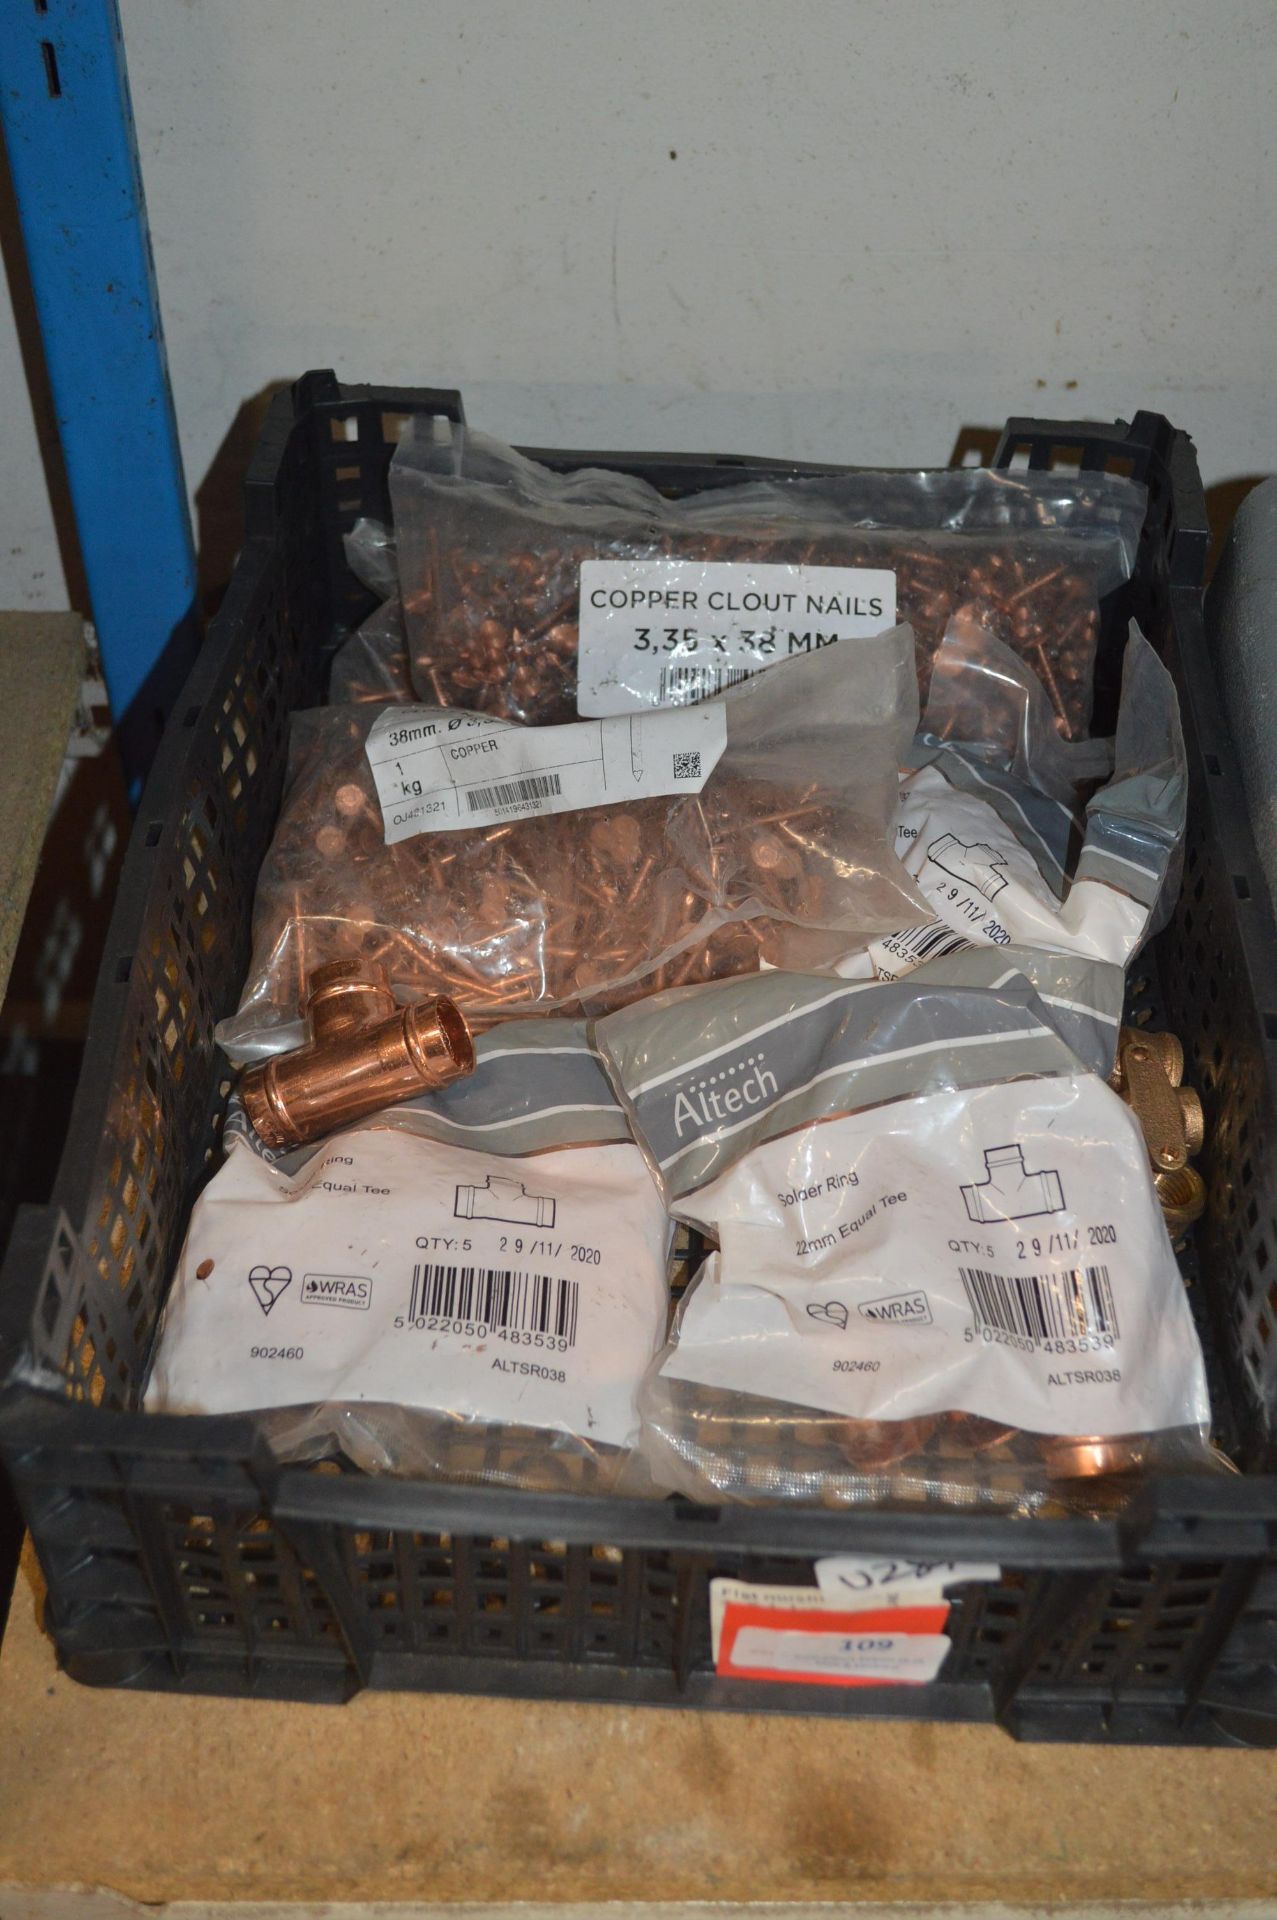 *Two 1kg Bags of Copper Clout Nails, and Various C